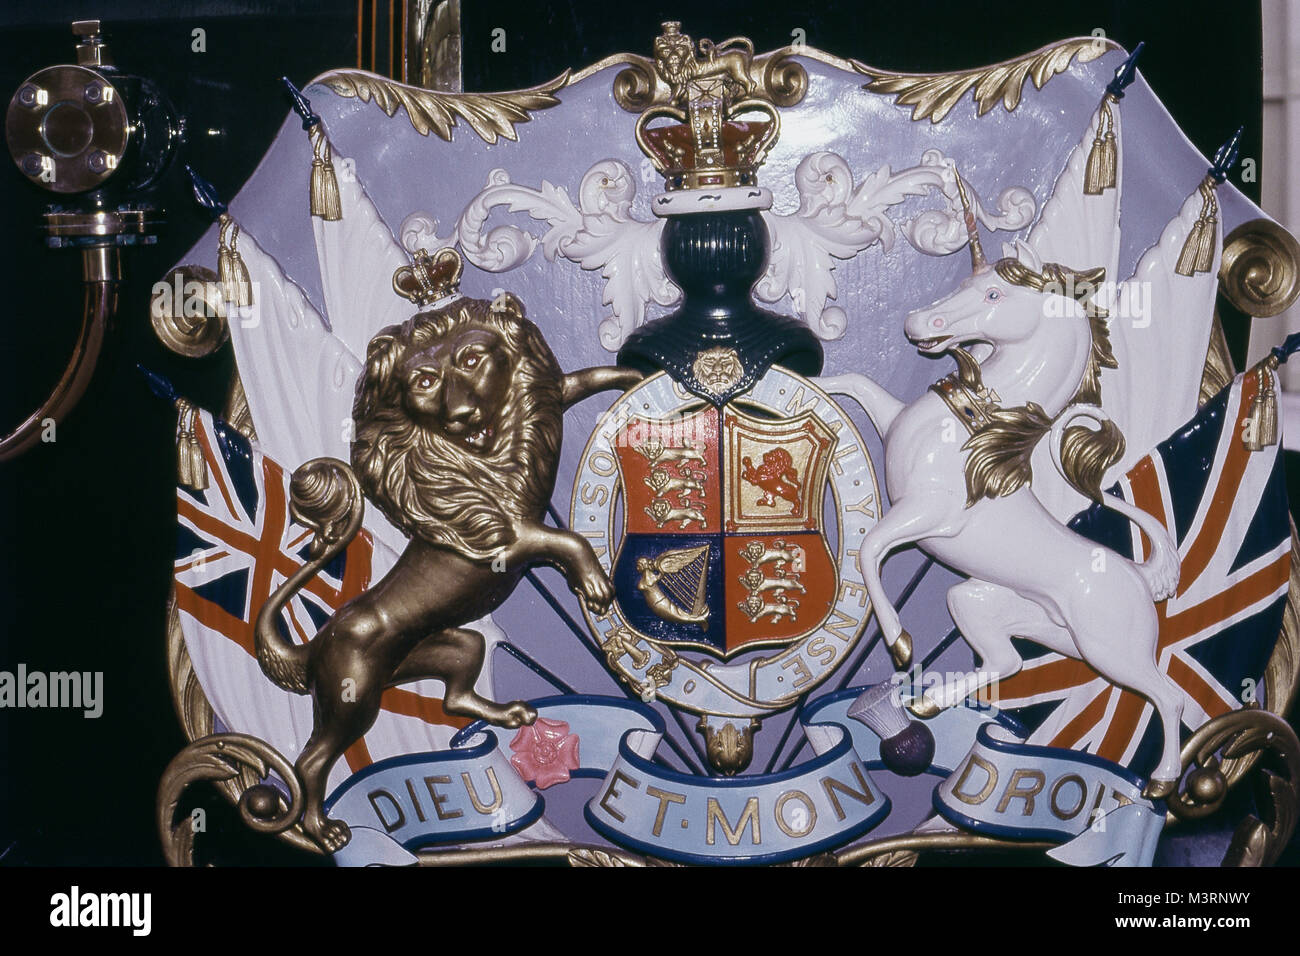 Royal coat of arms on train in Windsor, UK Stock Photo